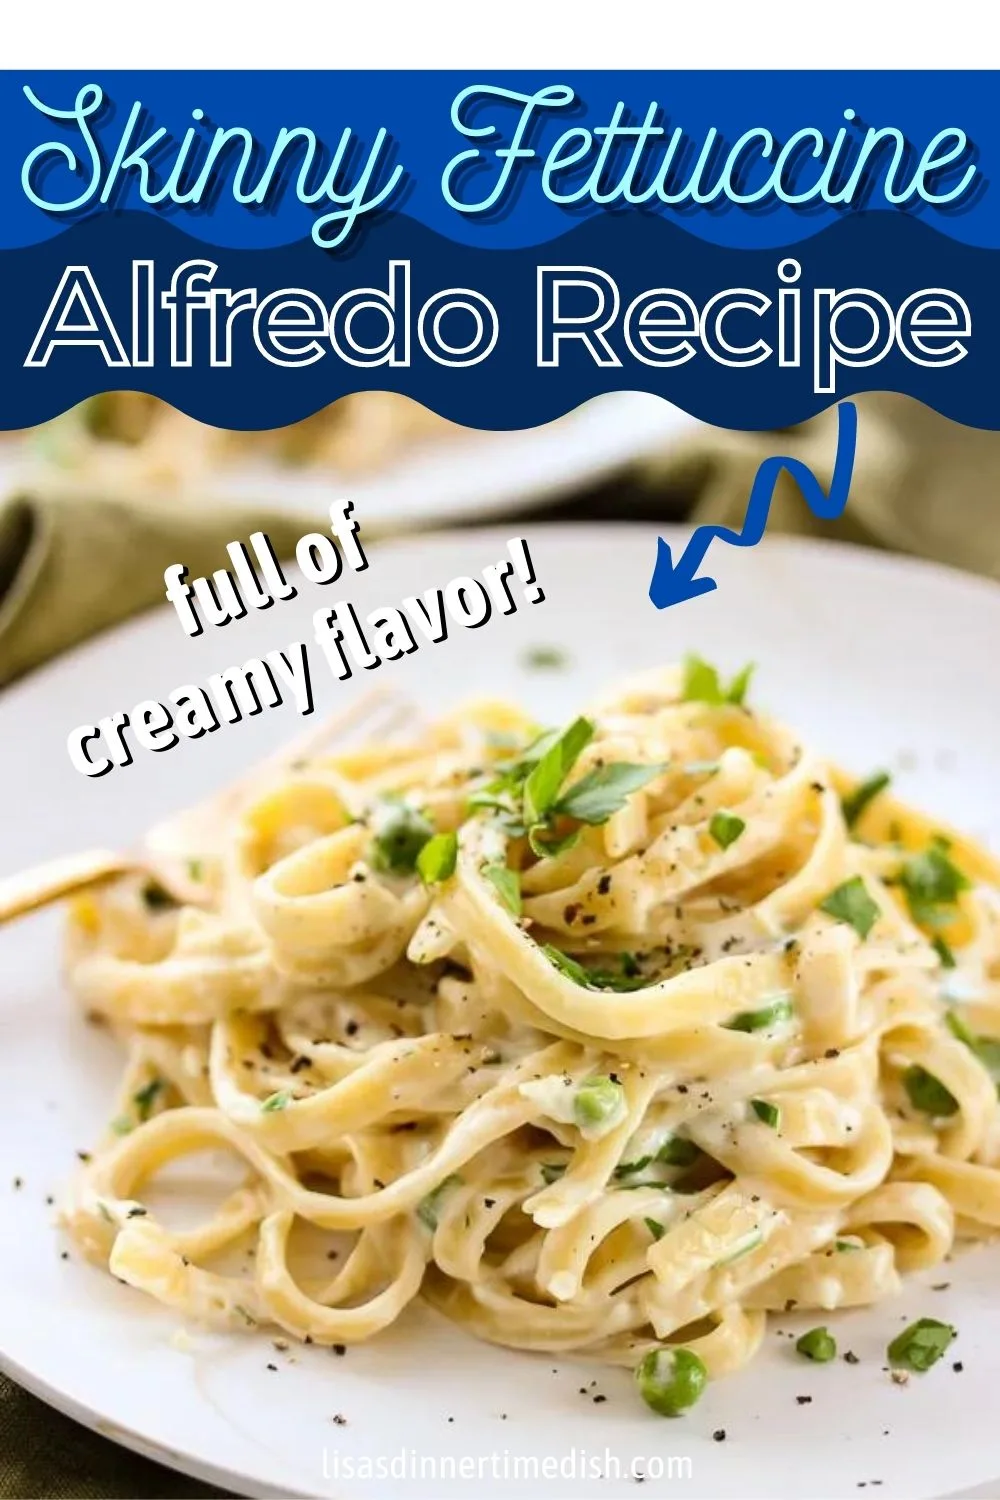 Skinny Fettuccine Alfredo plated and garnished with parsley and black pepper